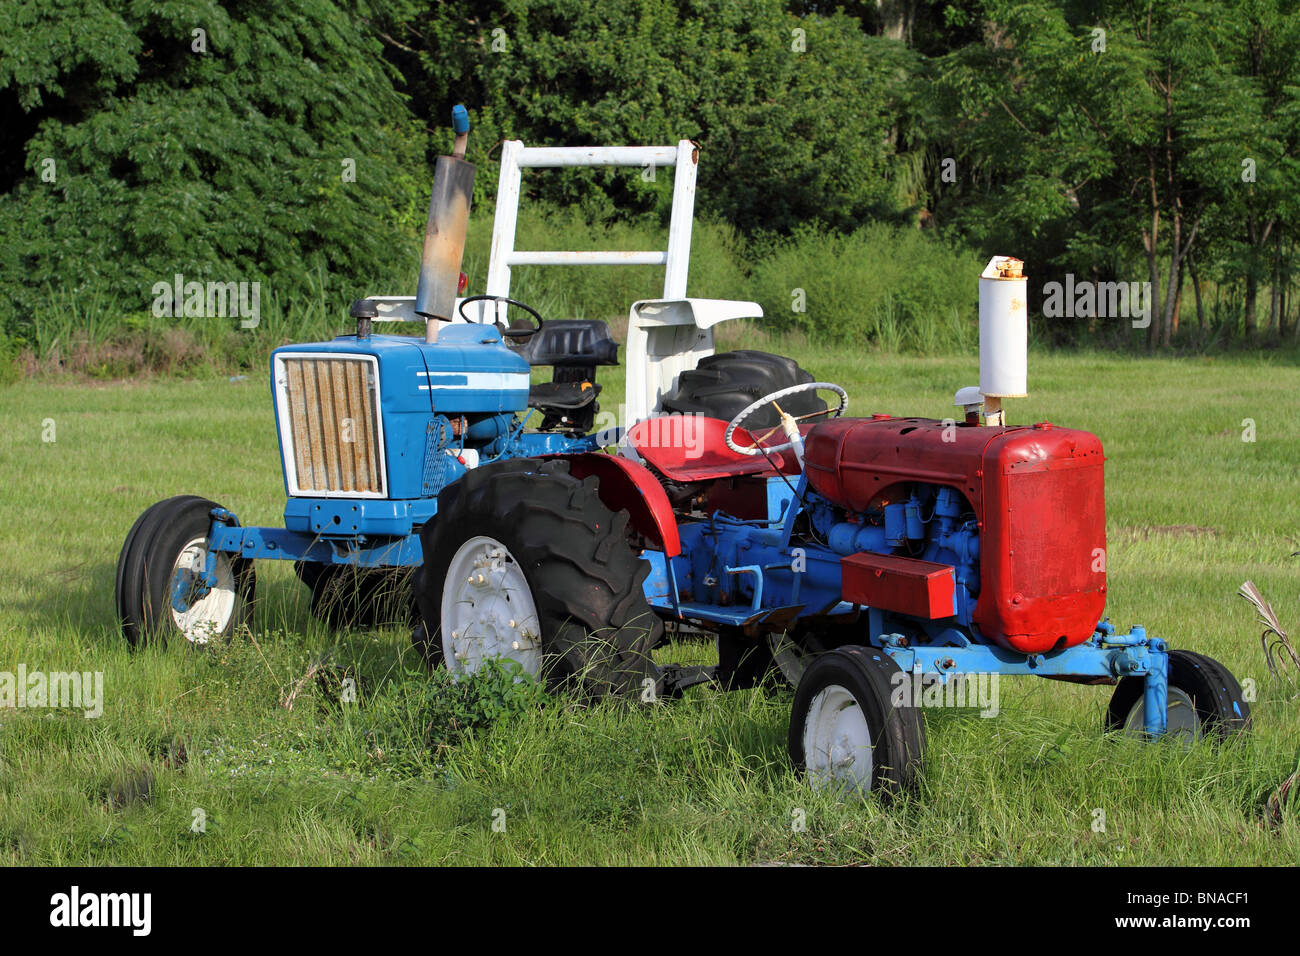 Tractors are waiting for their farmer. Stock Photo